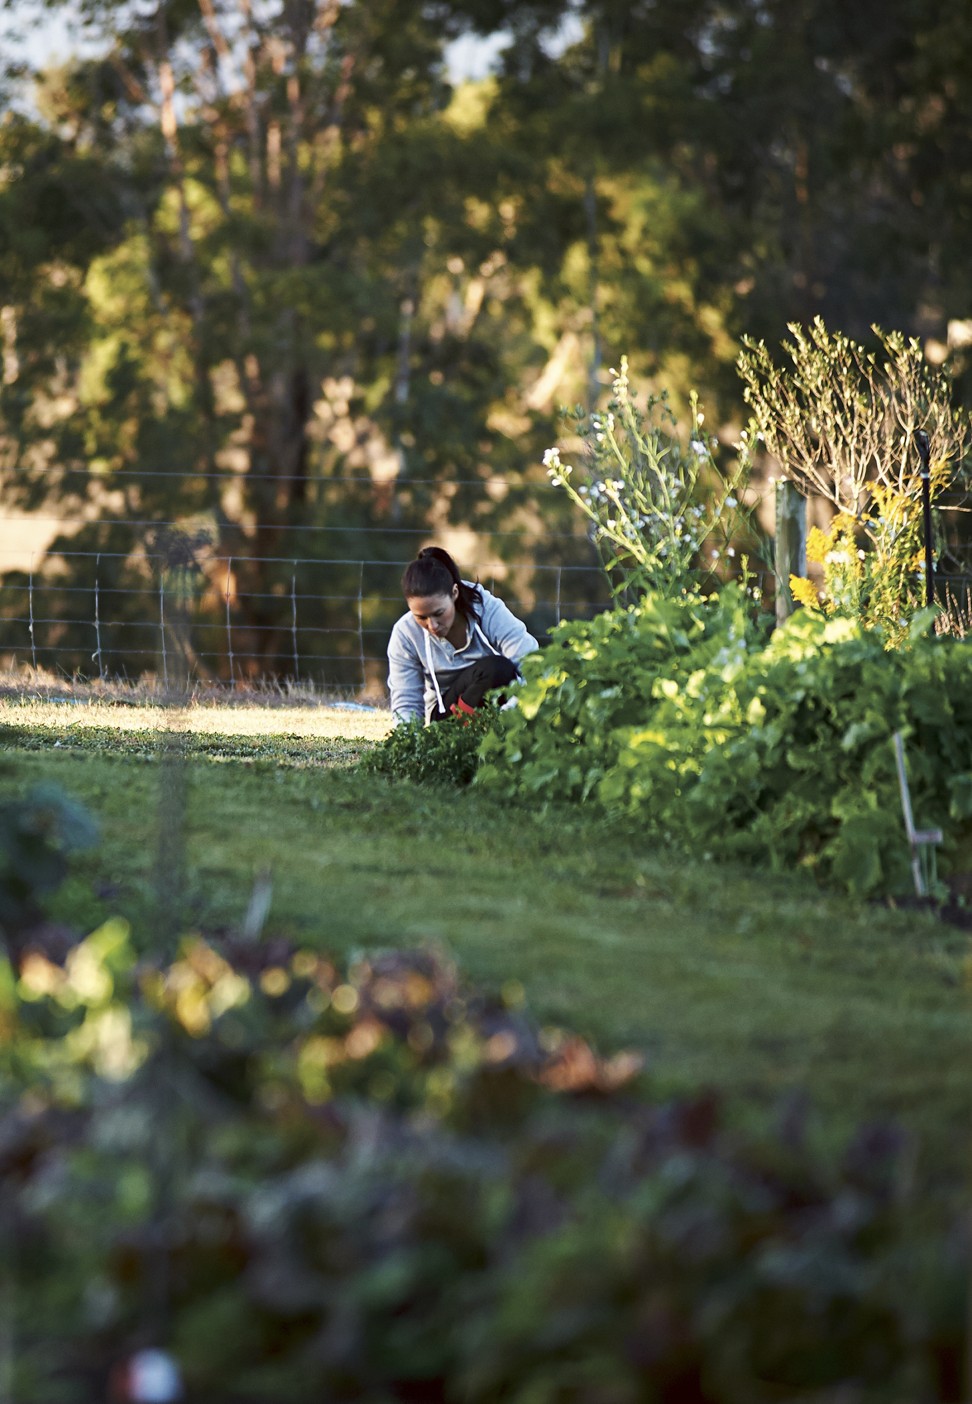 Farm-to-table chef Dan Hunter, of Brae restaurant in Australia, on the  pleasures of growing your own food